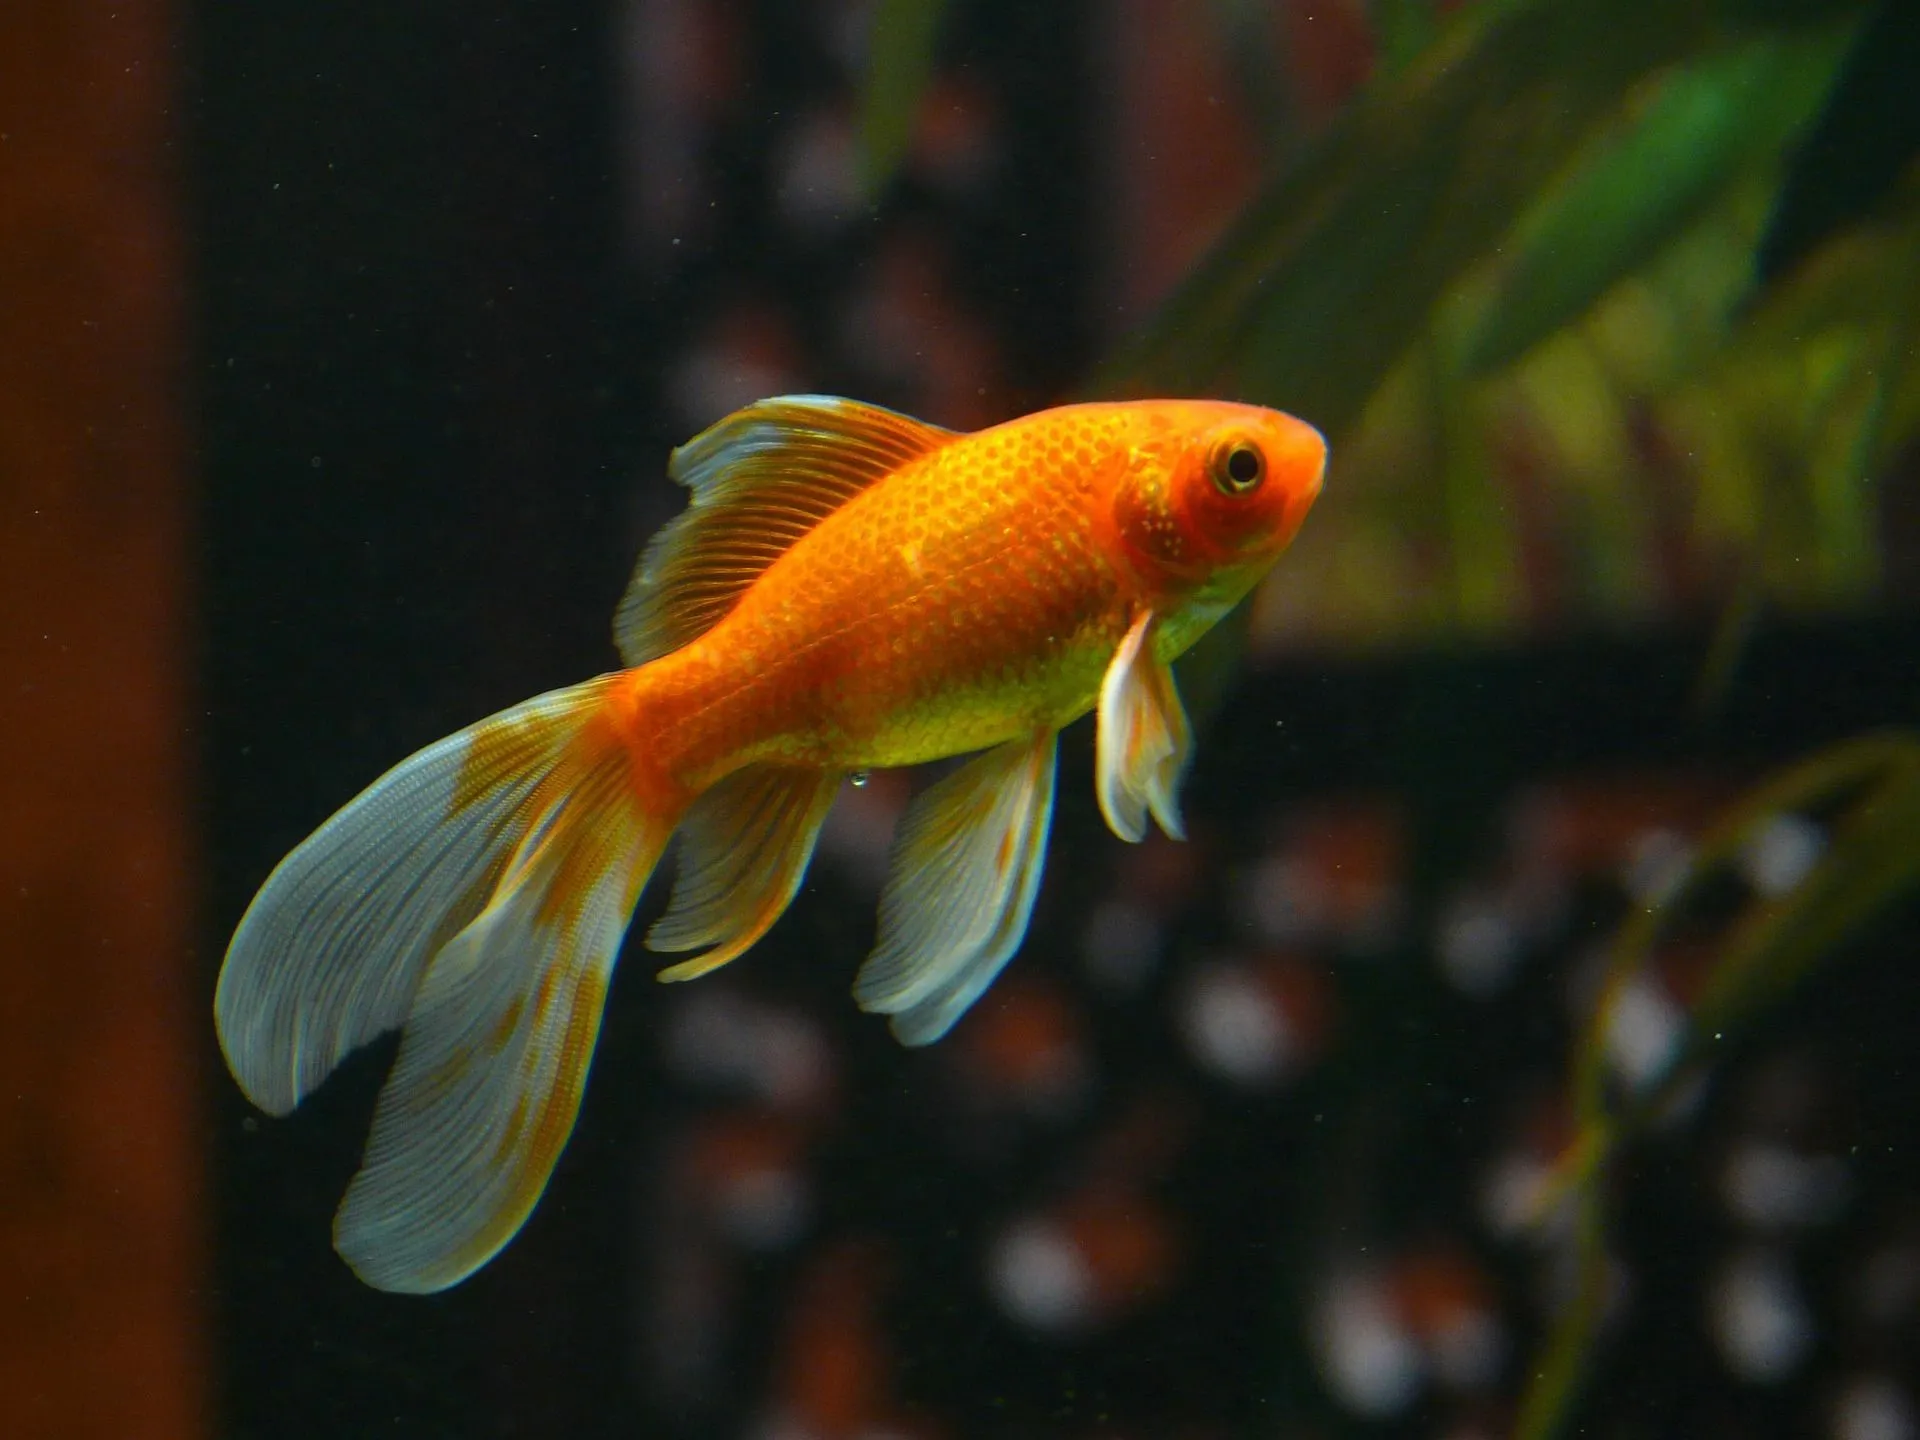 Goldfish is one of the most popular fish breeds in the world.